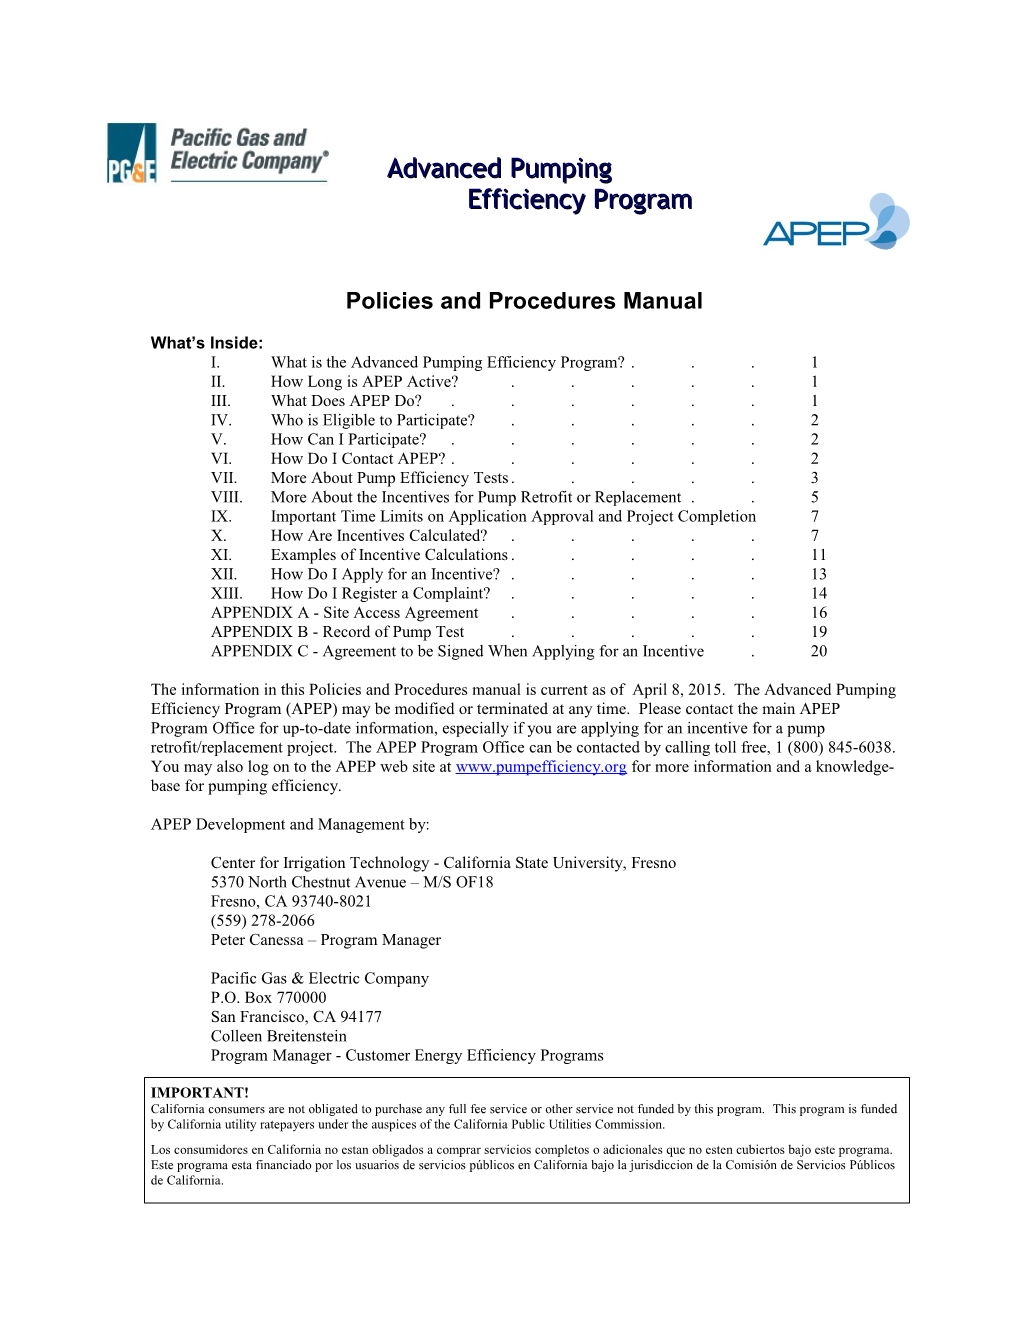 I. What Is the Advanced Pumping Efficiency Program? 1